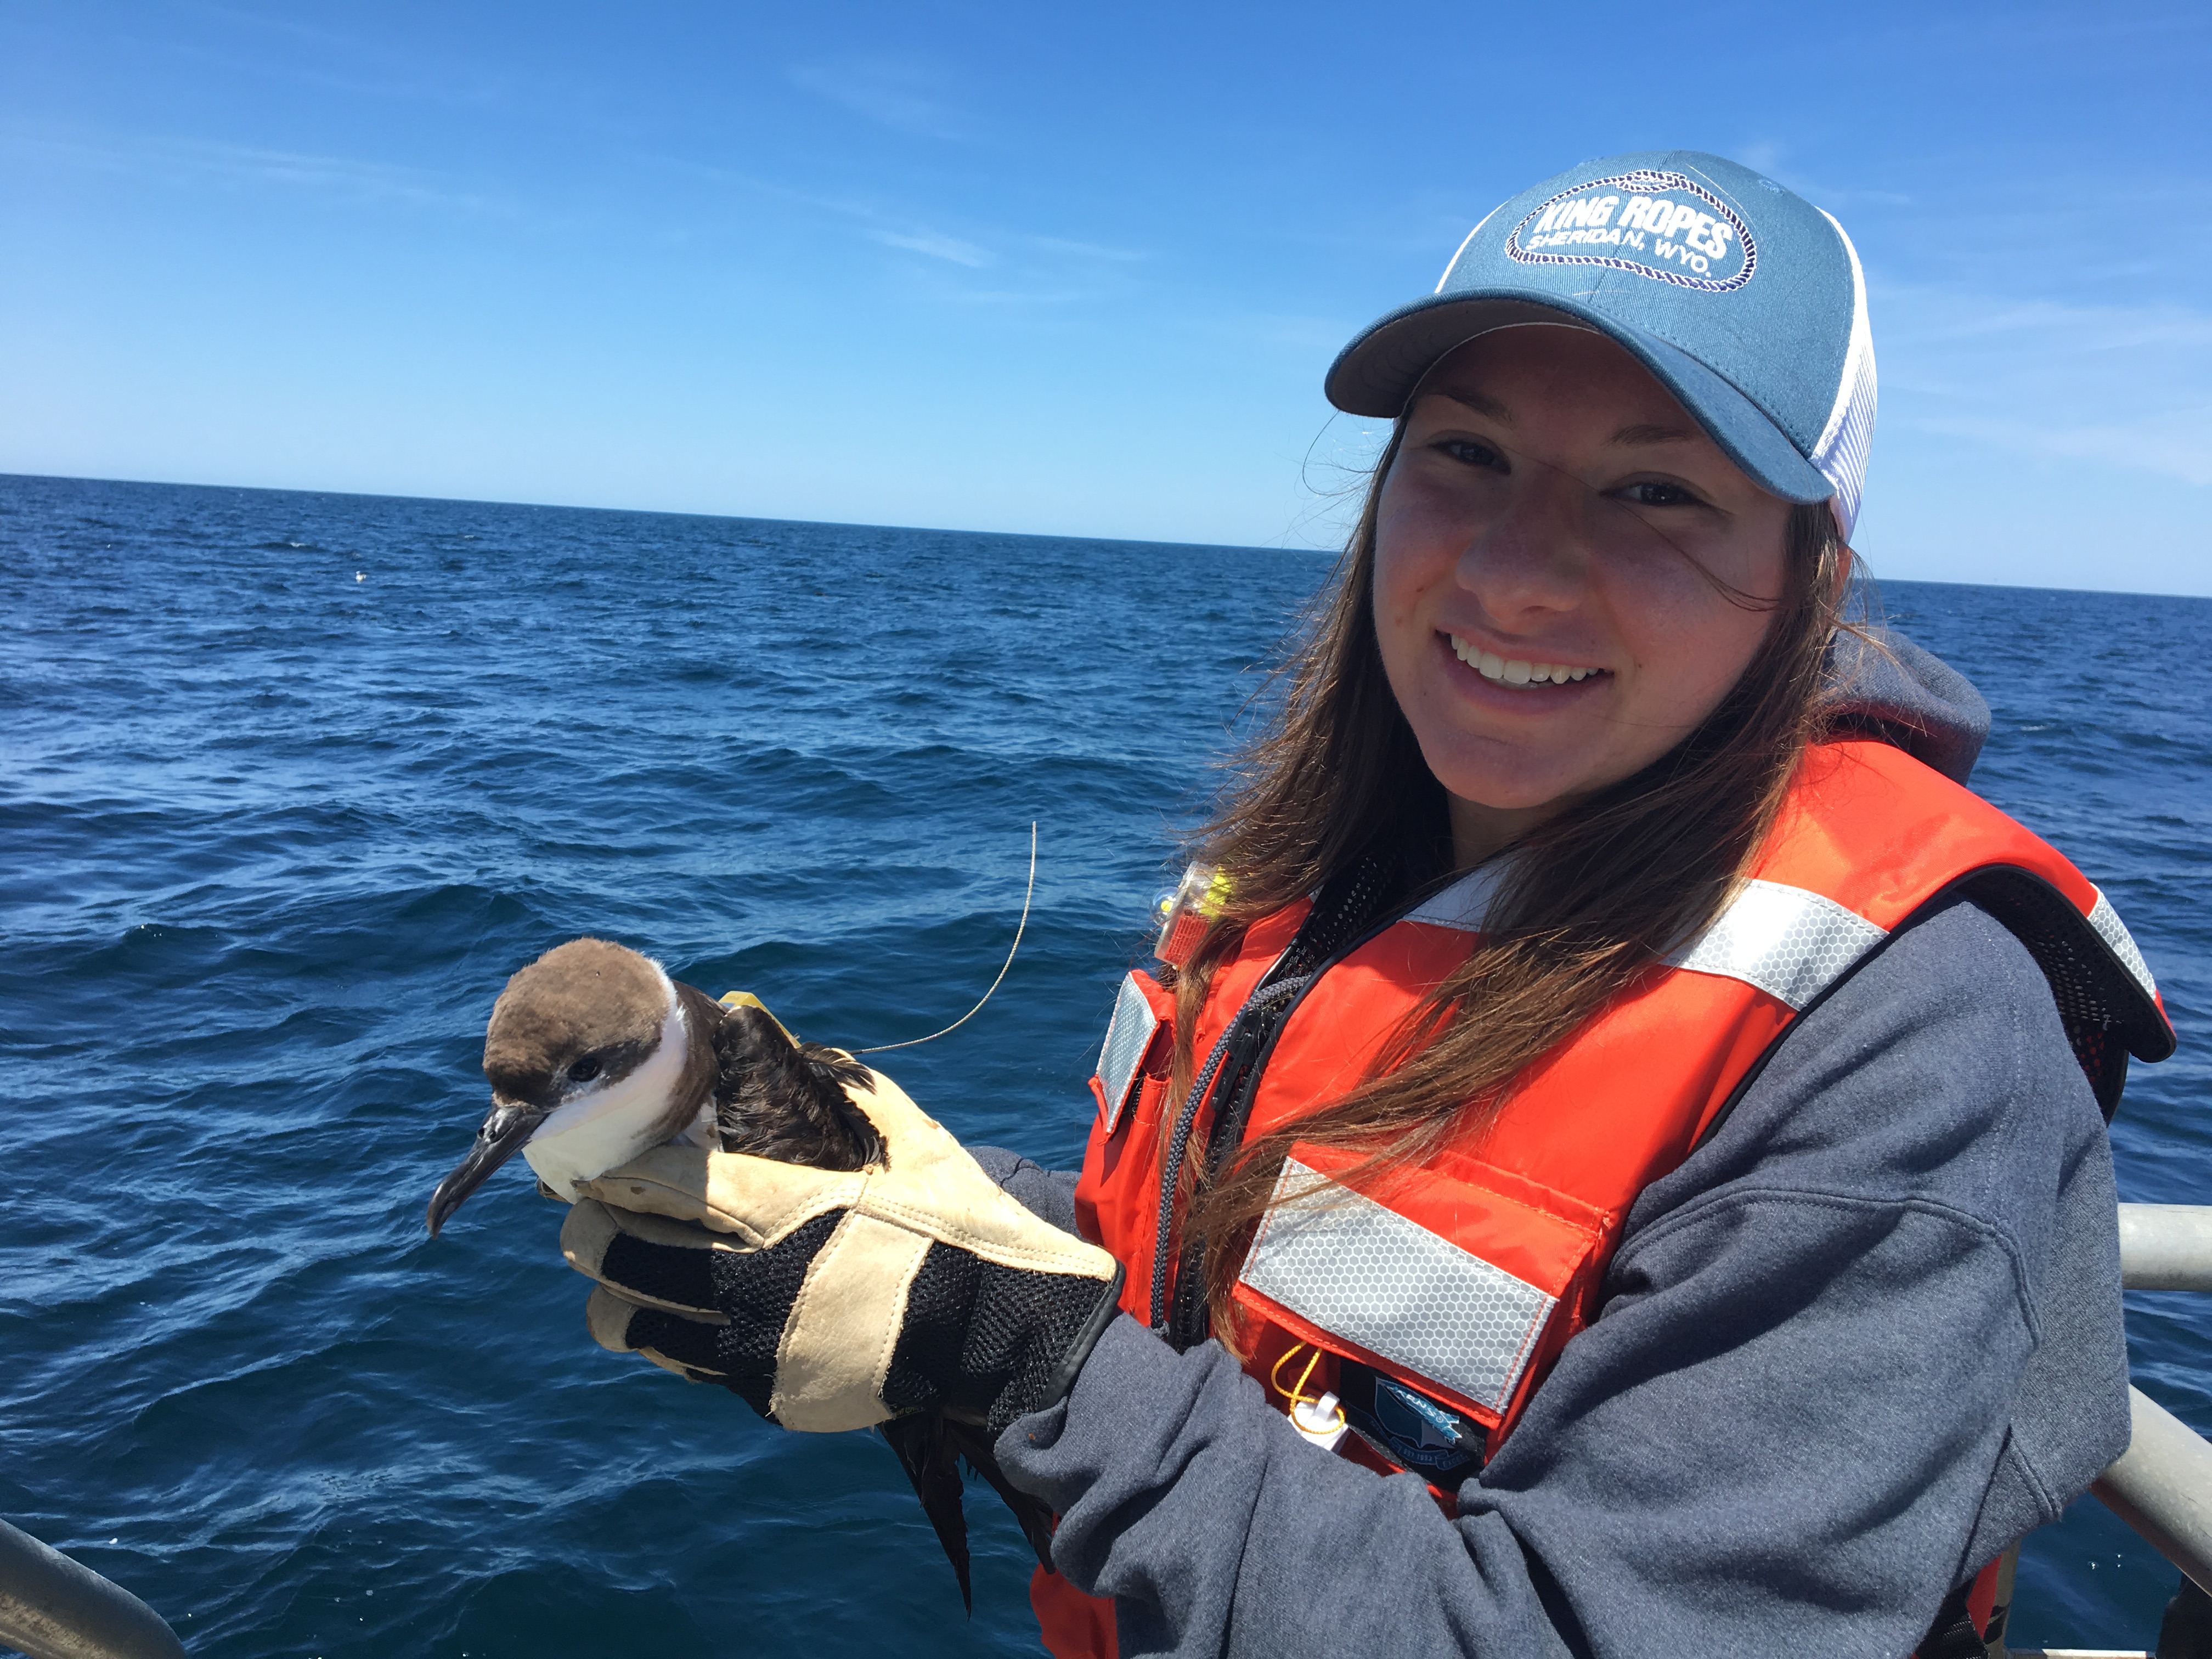 Teresa Giandonato is a NOAA Hollings Scholar doing a collaborative internship this summer between Stellwagen Bank National Marine Sanctuary and the Woods Hole Oceanographic Institution. She participated in a shearwater bird tagging cruise in the Gulf of Maine. Teresa, her NOAA mentor, and fellow field scientists put trackers on shearwaters to better understand their behavior and role in the ecosystem. 

